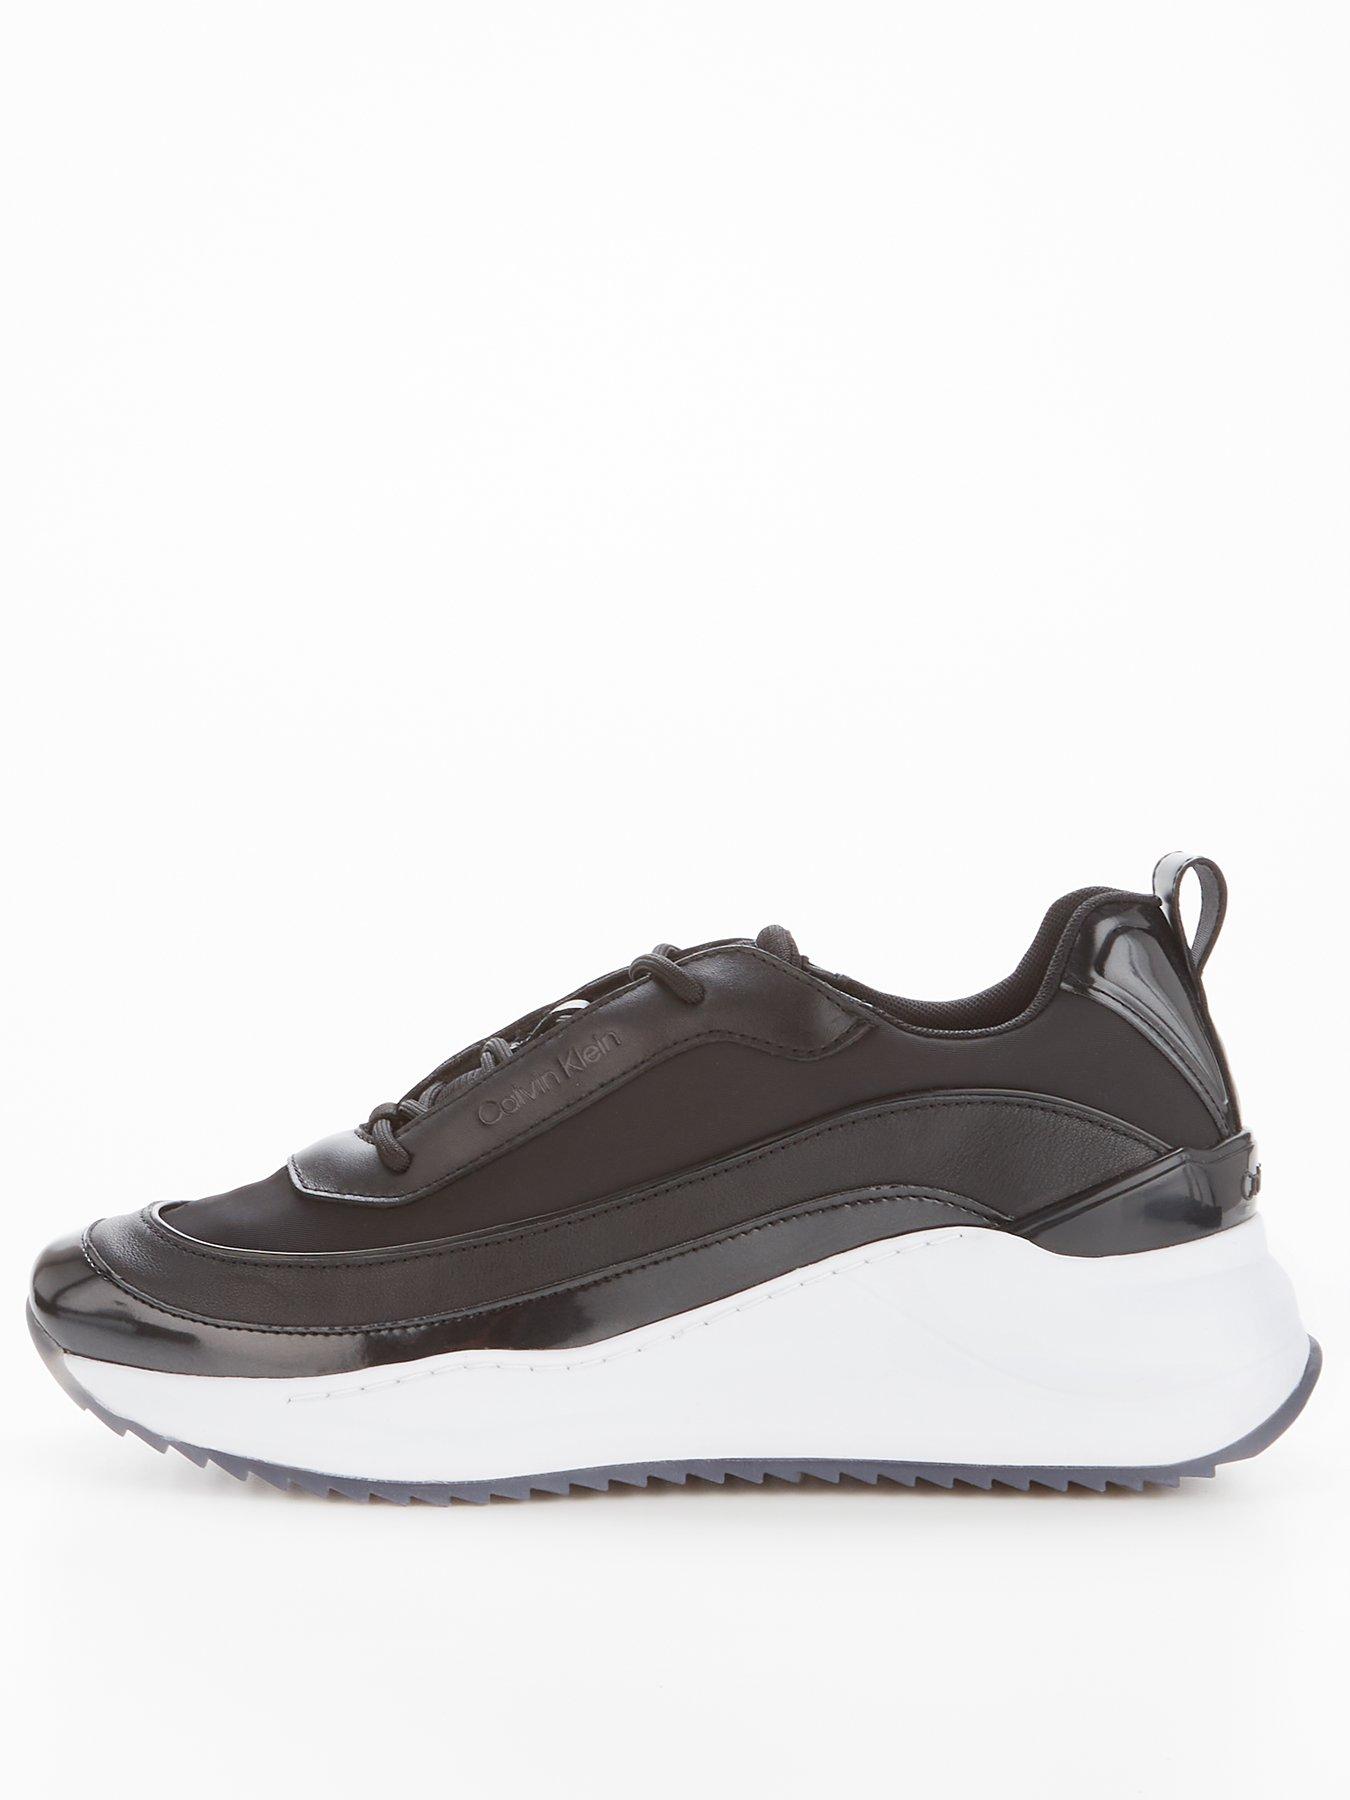 Calvin Klein Chunky Internal Wedge Lace Up Trainer - Black | very.co.uk